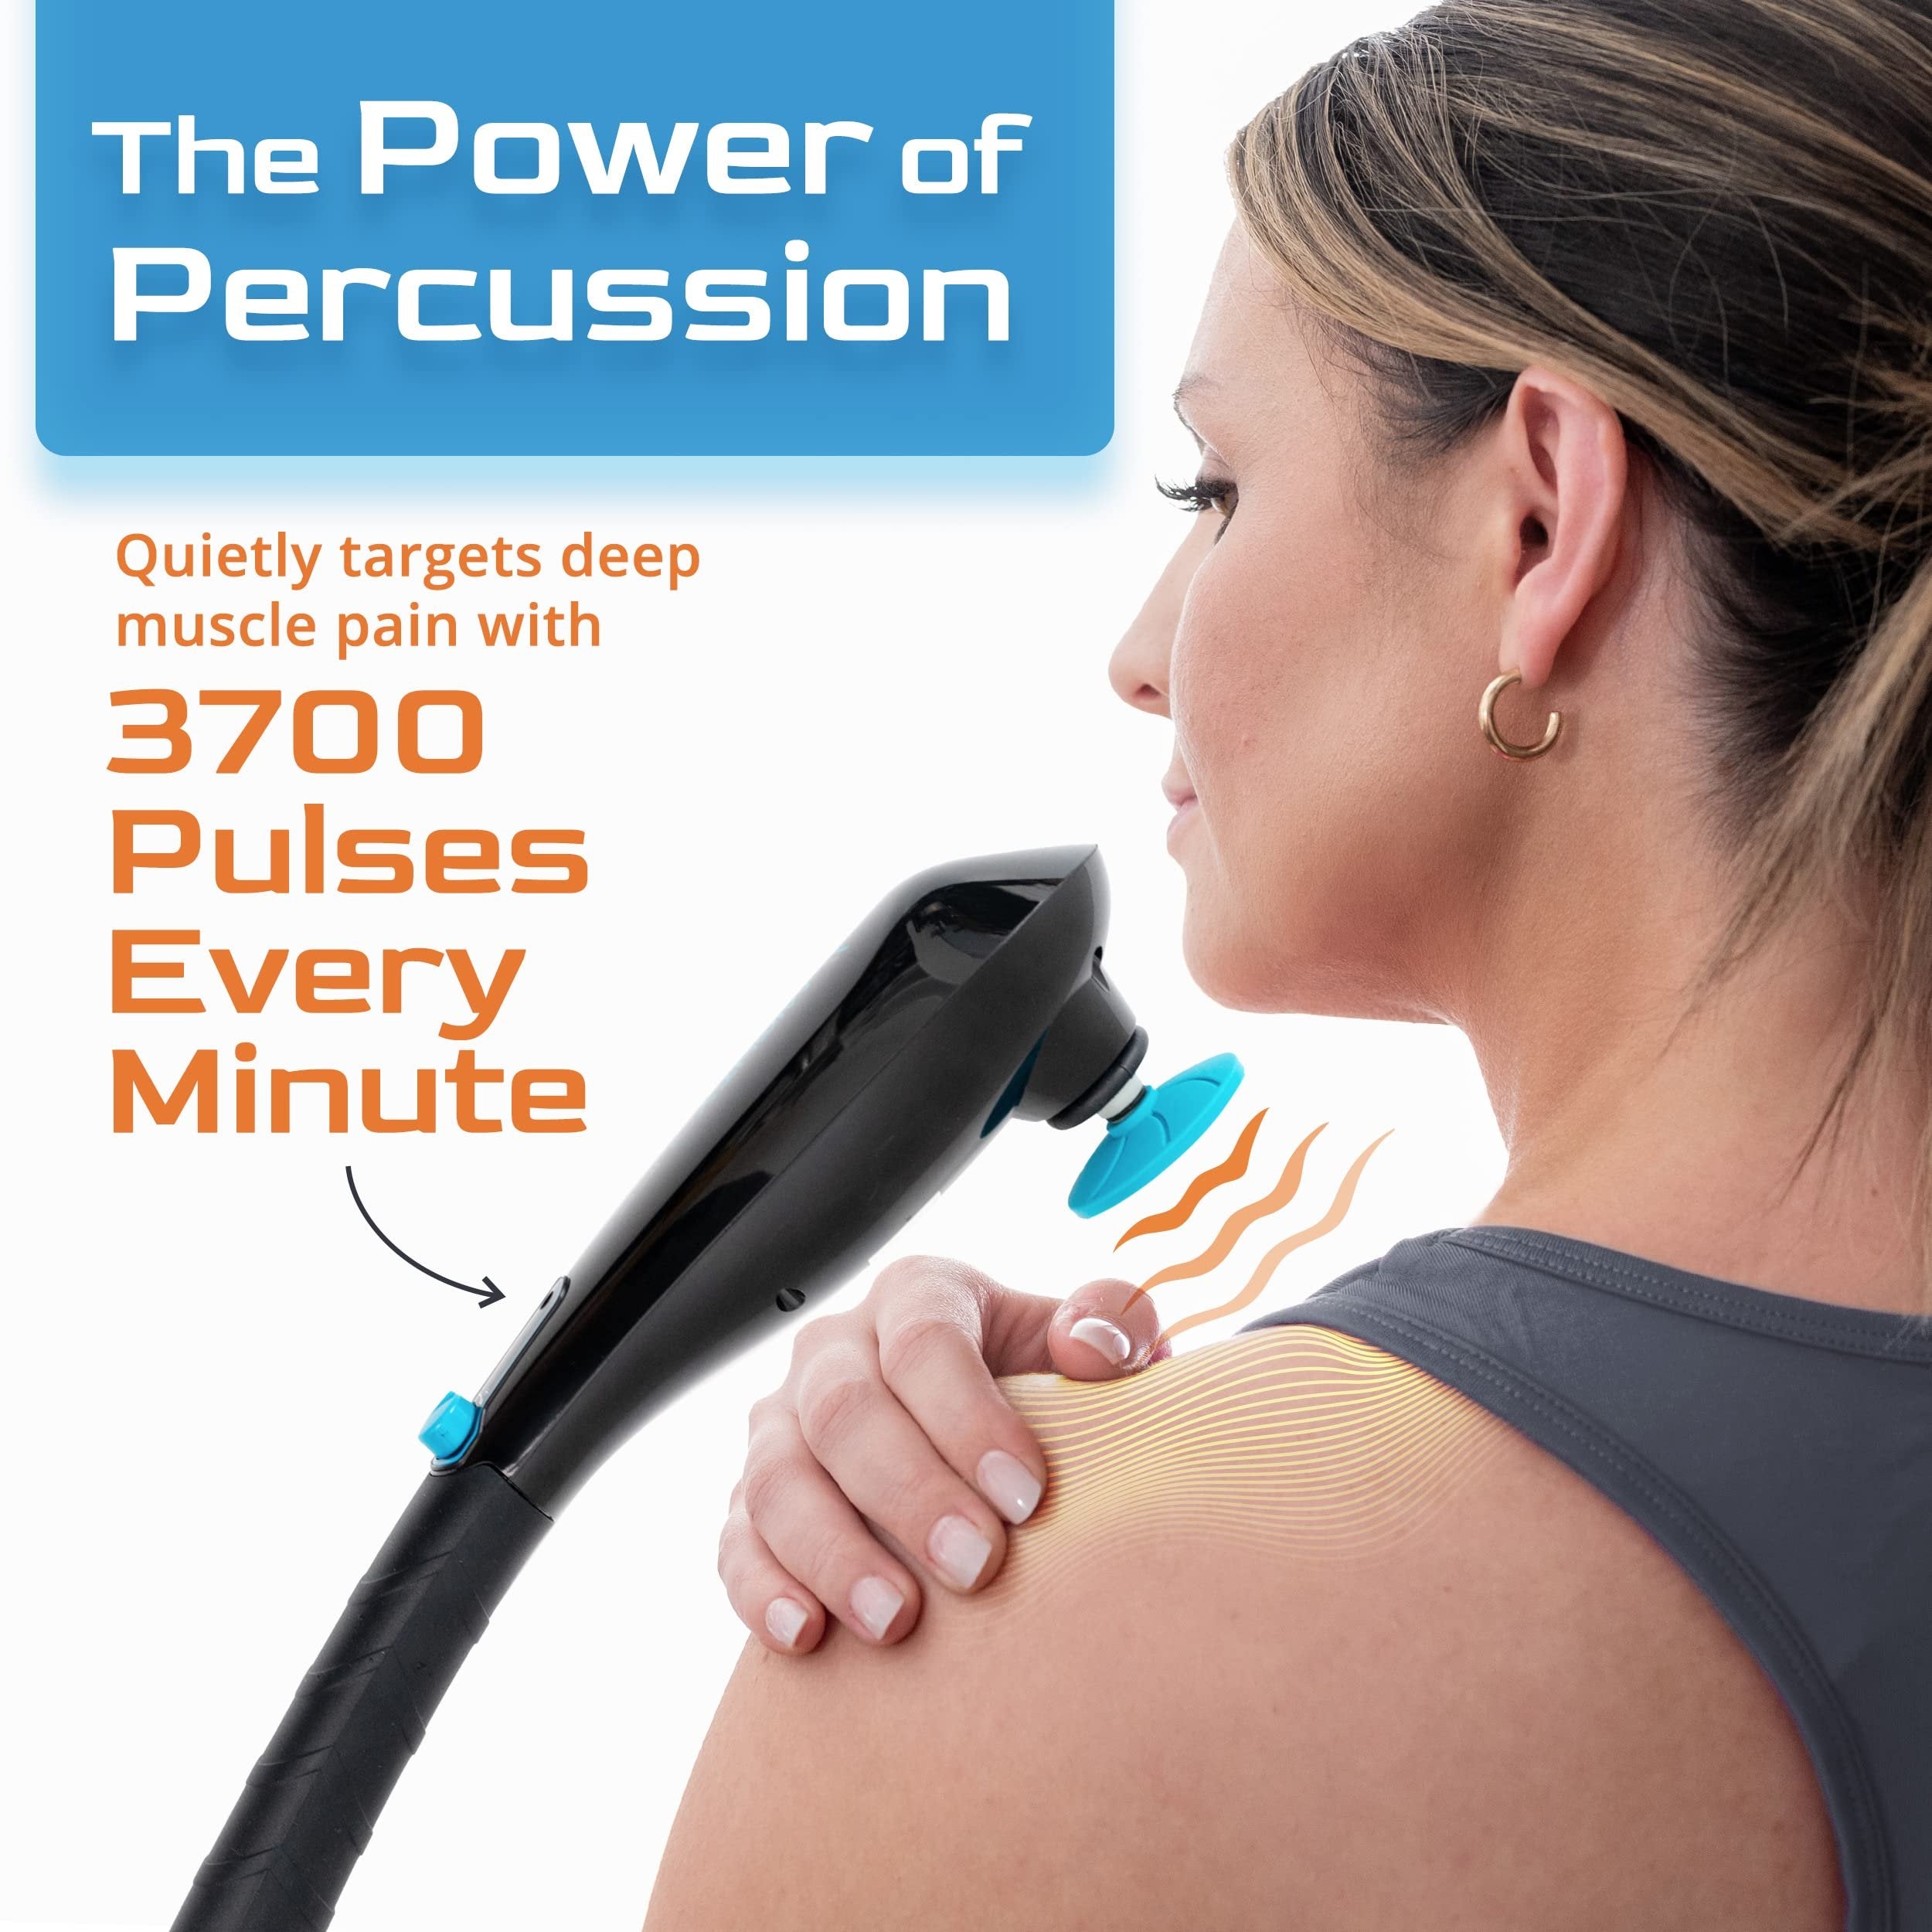 Mighty Bliss Cordless Deep Tissue Massager - Blue, Handheld Percussion Machine for Full Body Pain Relief, 1 Count (Pack of 1)